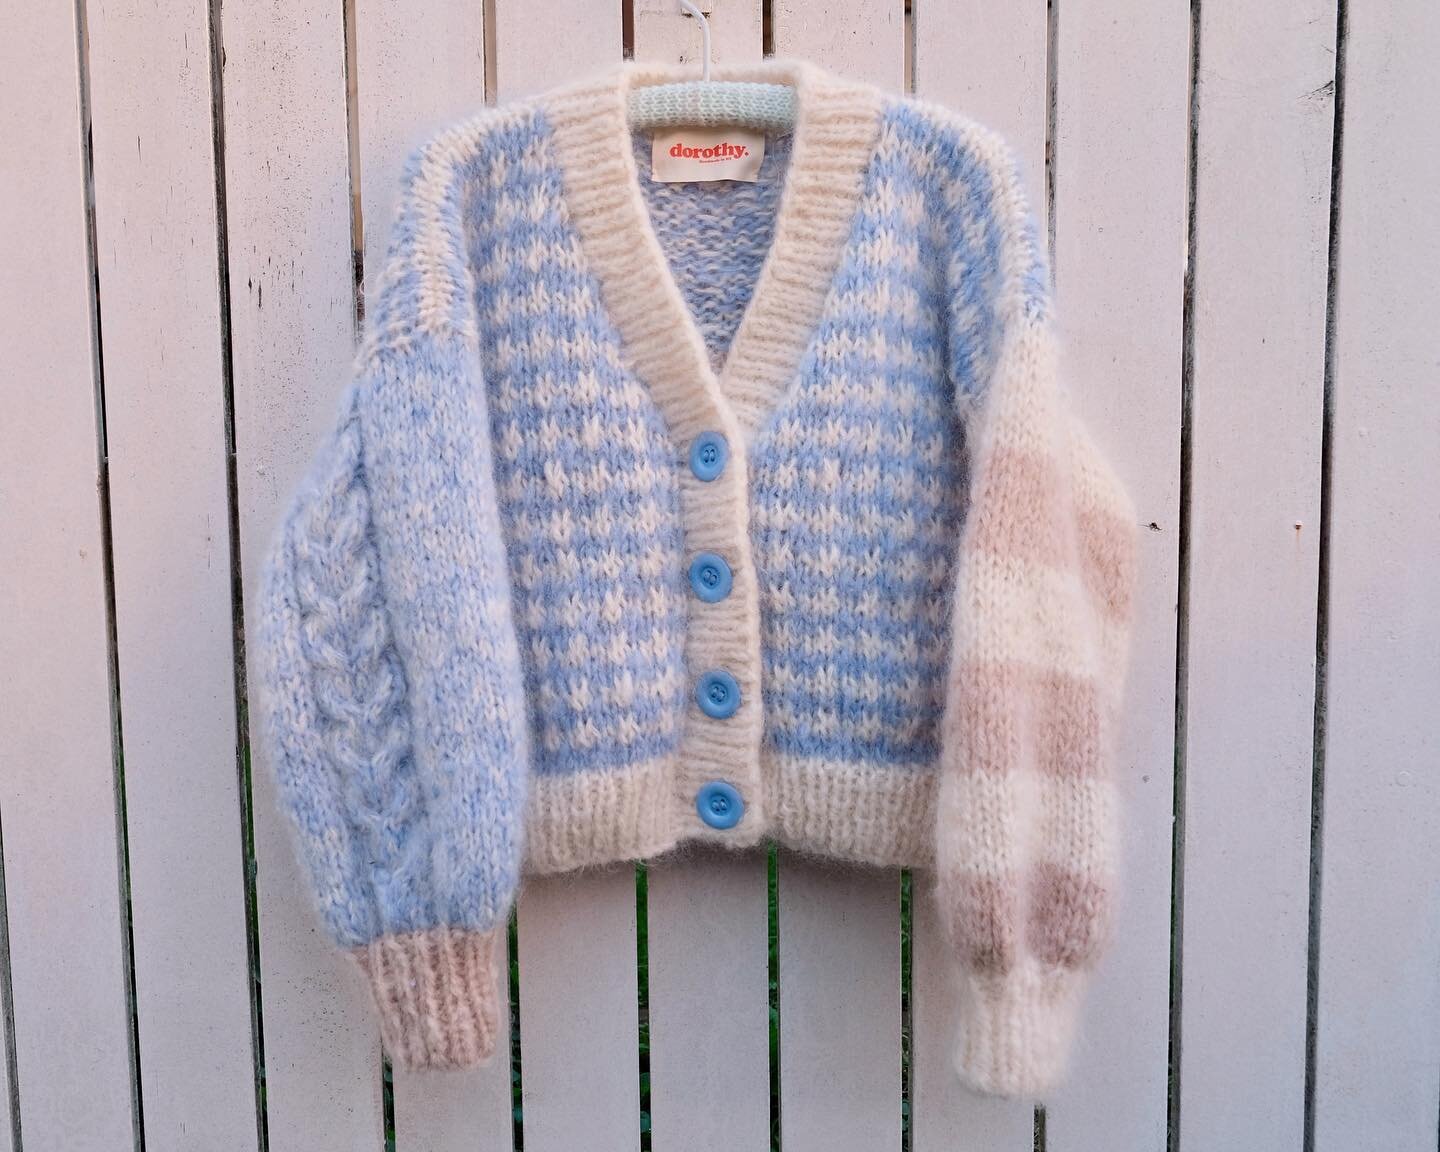 I&rsquo;m ready-made 🦋 
&bull;
A one-off Dorothy cardigan, available now.
&bull;
🦋 Carolina knitted cardigan
🦋$470NZD
🦋Sizing: Width 58cm, Length 50cm
🦋 Material: 94%NZ Mohair 6% nylon 
🦋Free shipping in NZ, overseas shipping costs available on